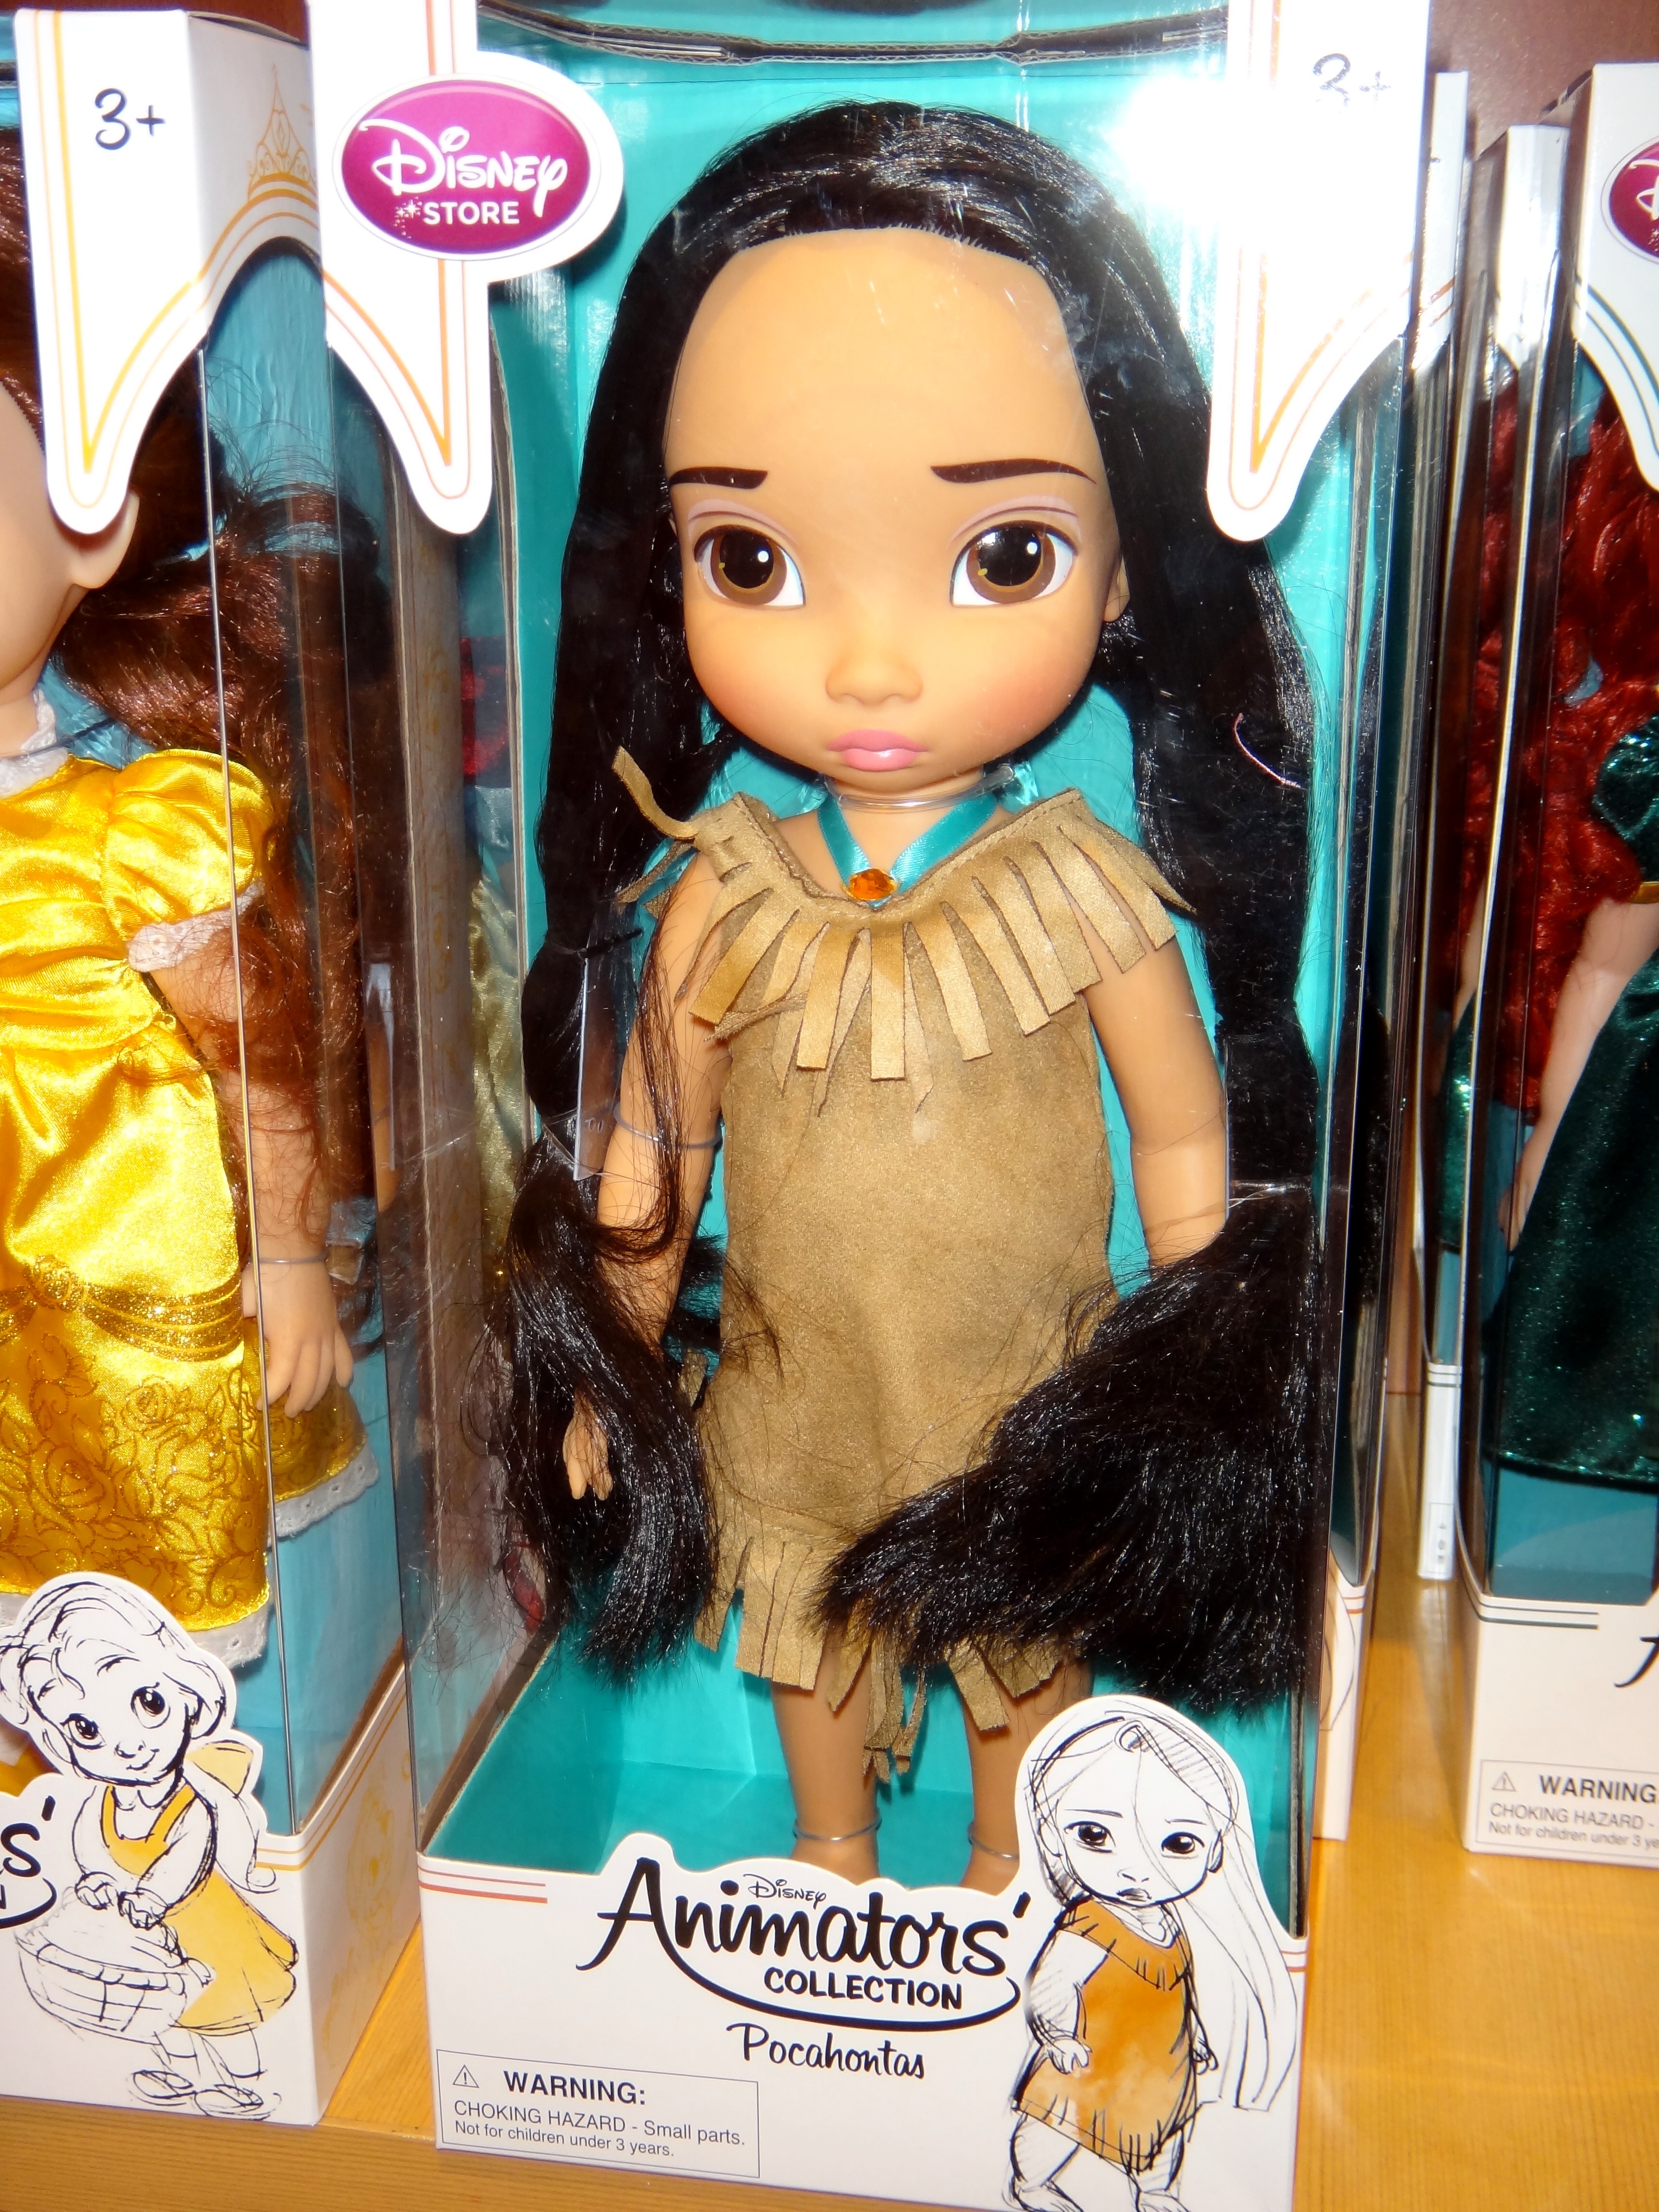 All sizes | Disney Animators' Collection Pocahontas Doll - 16'' - US Disney  Store - In Store Display - 2013-09-07 | Flickr - Photo Sharing!